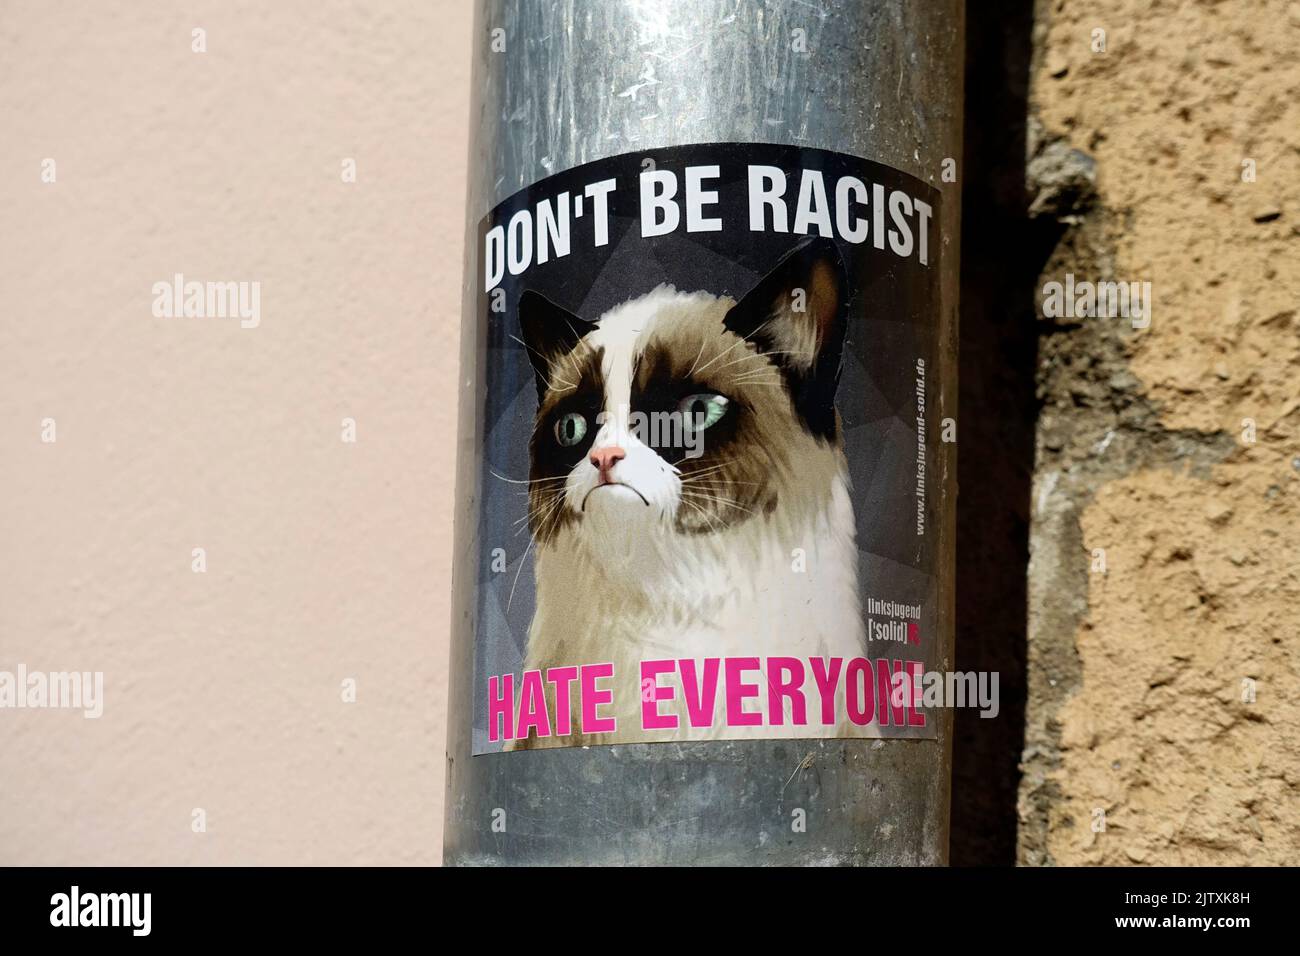 Sticker, don't be racist, hate everyone, Brandenburg an der Havel, Germany Stock Photo